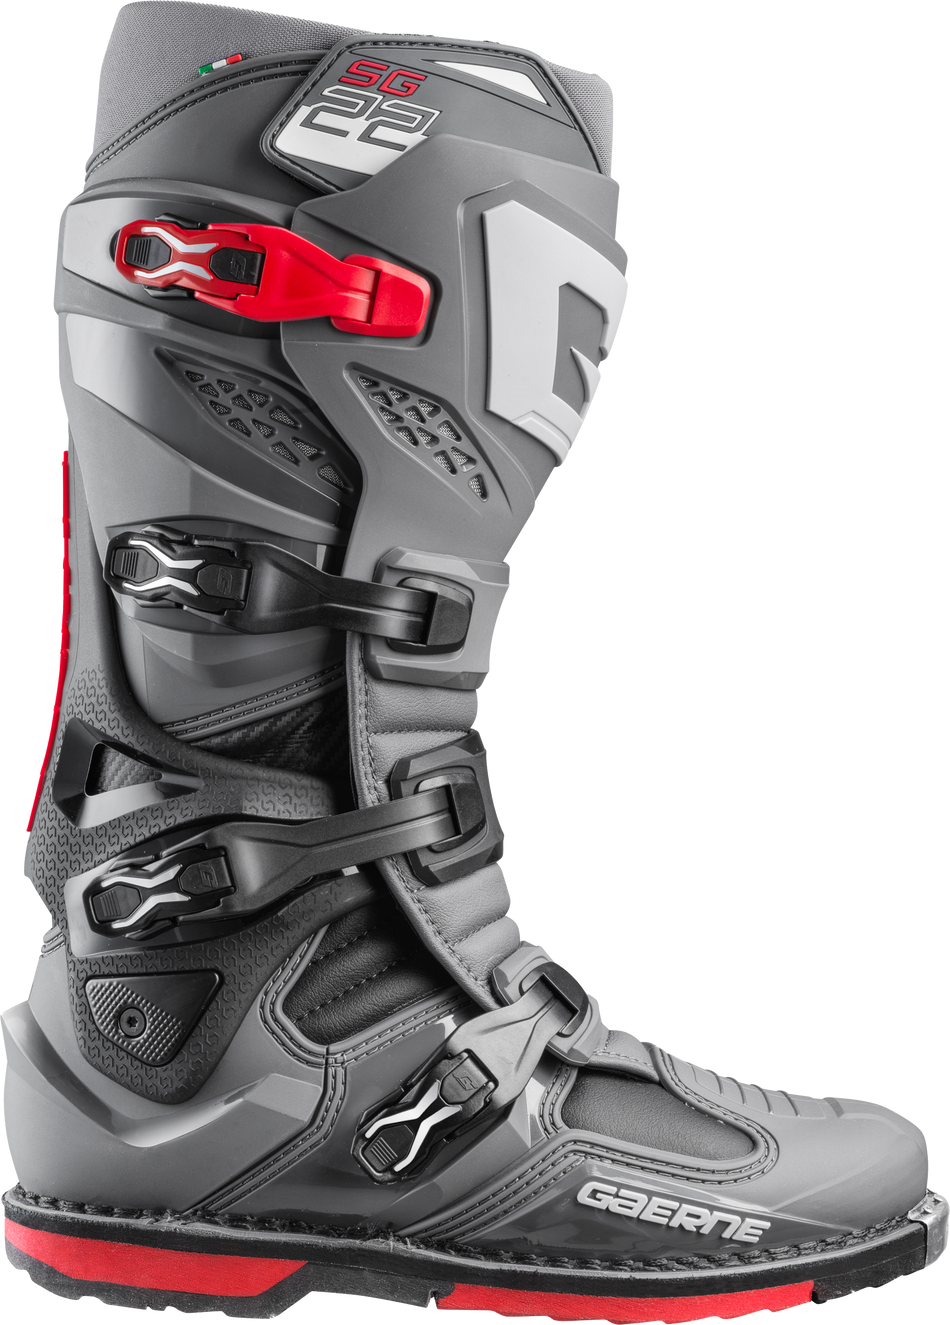 GAERNE Sg-22 Boots Anthracite/Black/Red Sz 10 2262-007-10